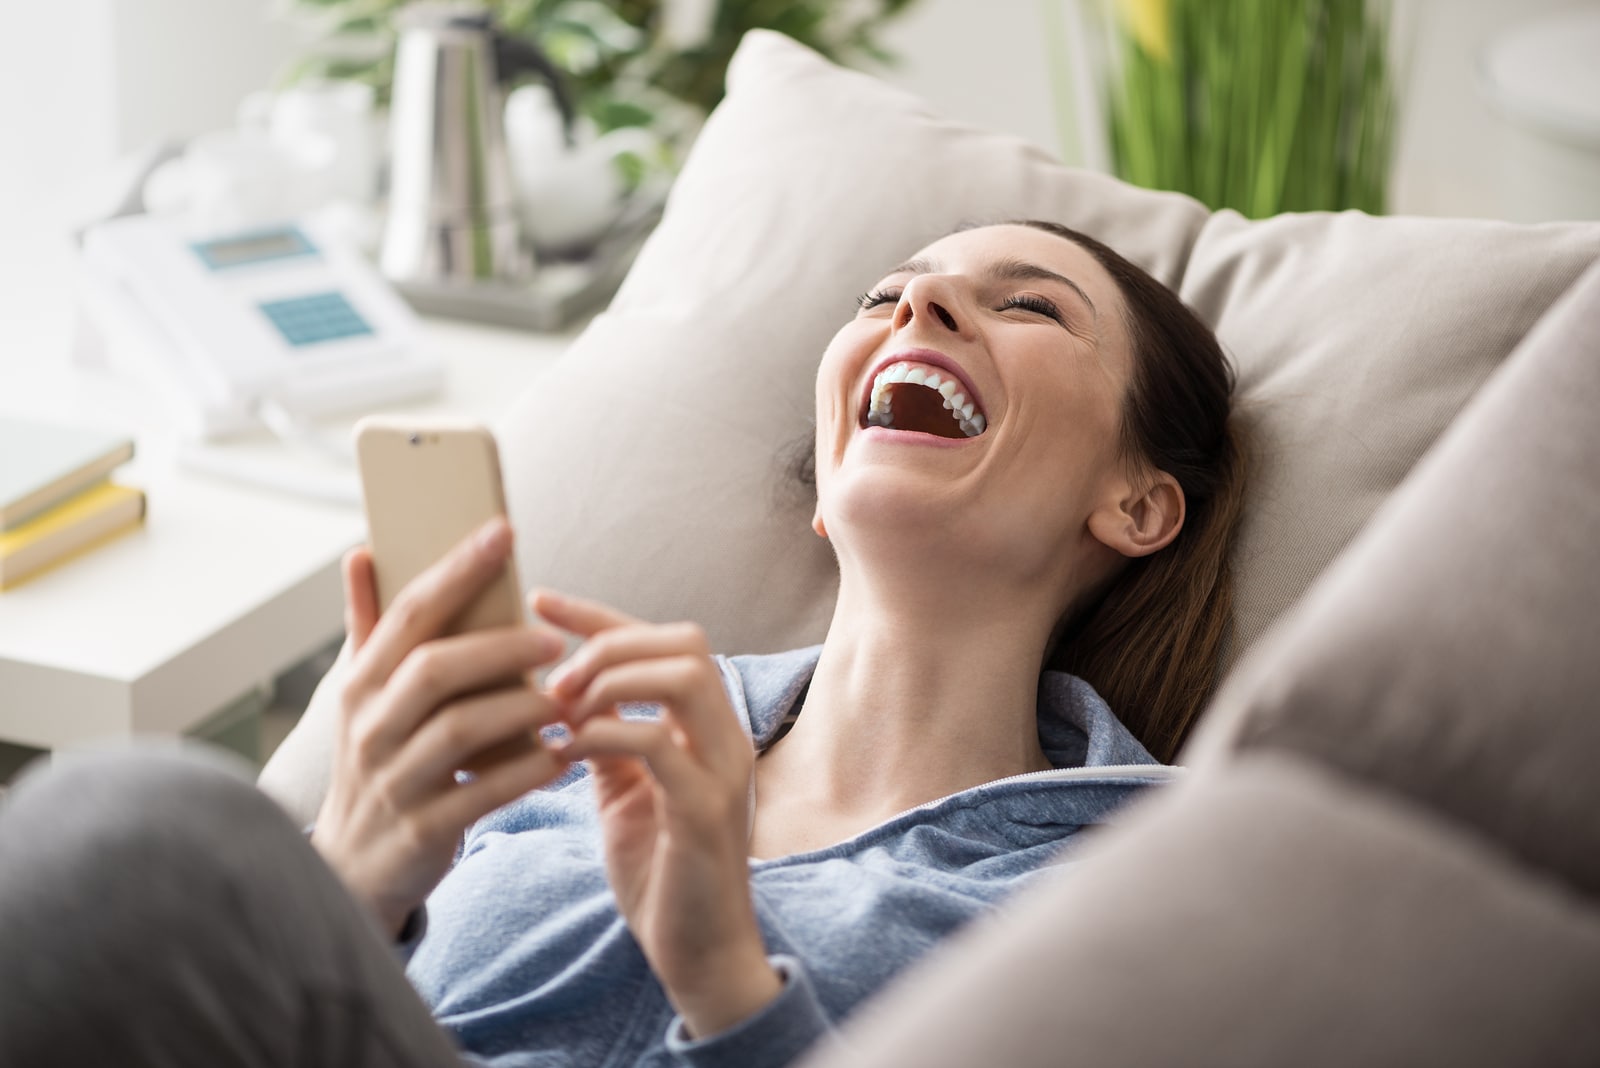 Relaxed smiling woman on the couch at home she is using a smartphone and laughing